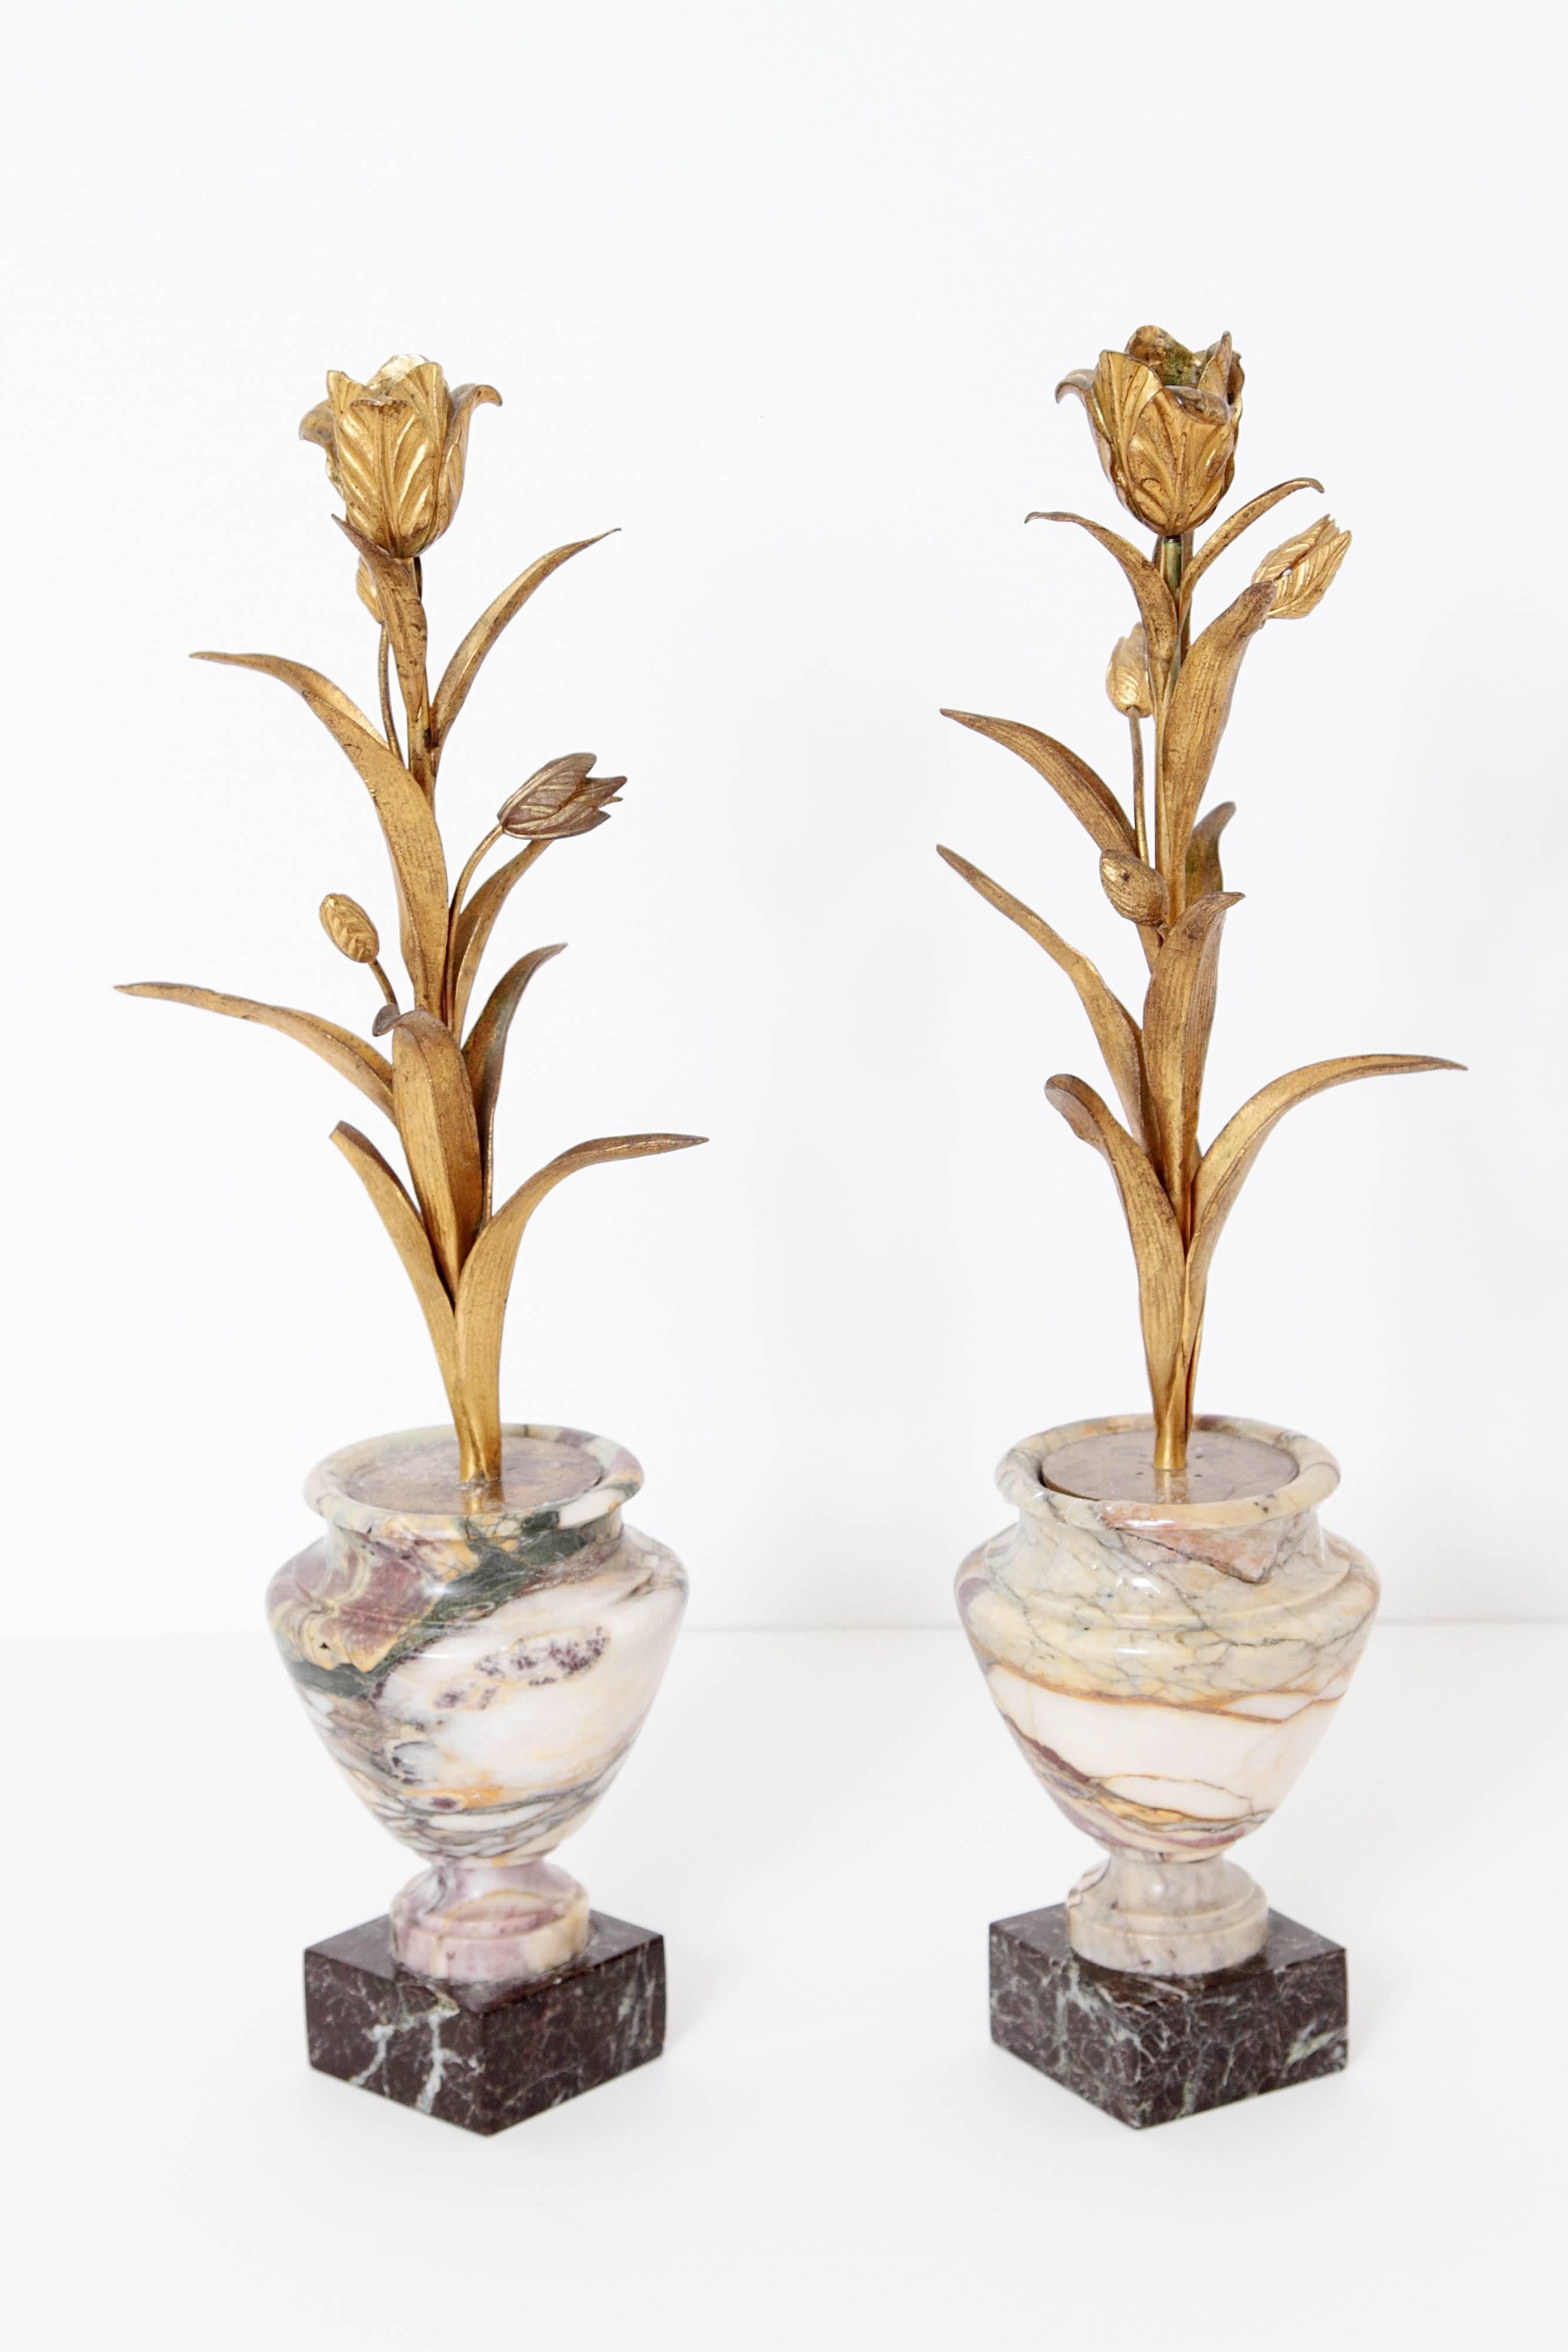 Stunning pair of 19th century gilt bronze tulip shaped candleholders. Set in marble urns, upon square marble bases. So Beautiful!

 